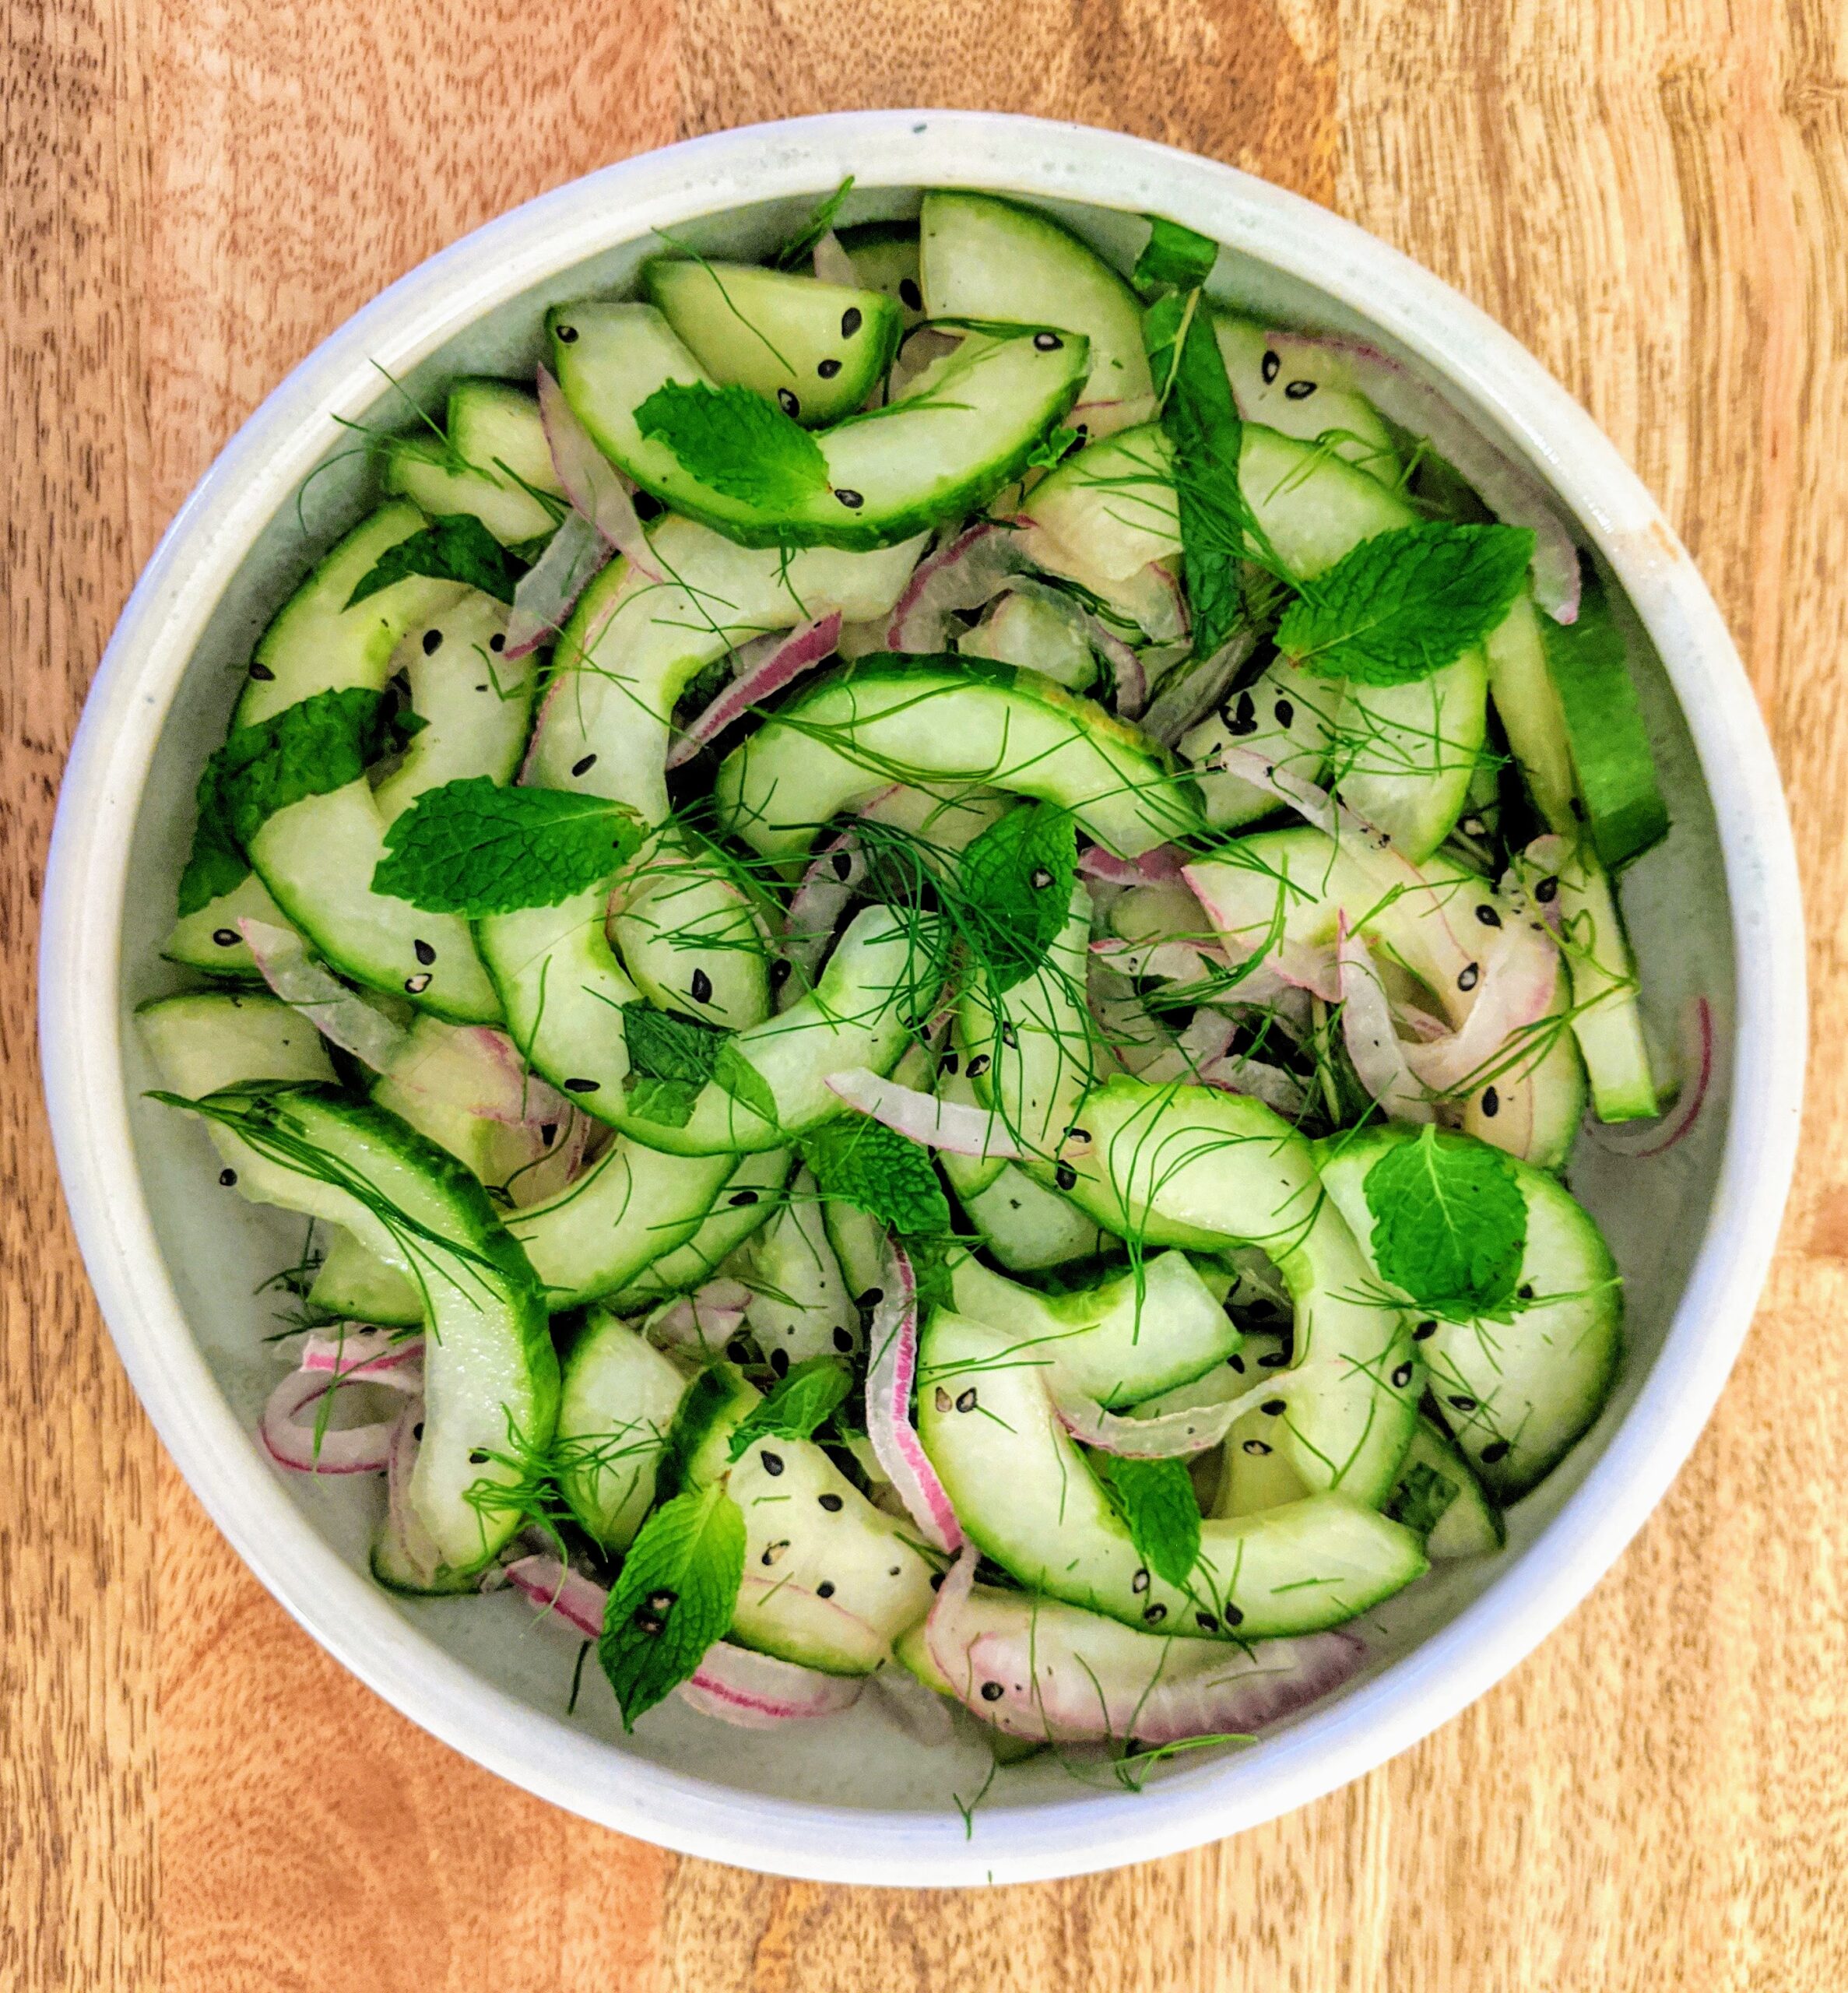 A shallow bowl full of sliced English cucumber halves, thinly sliced red onion, toasted black sesame seeds, and a trio of fresh herbs (cilantro, dill, and mint).